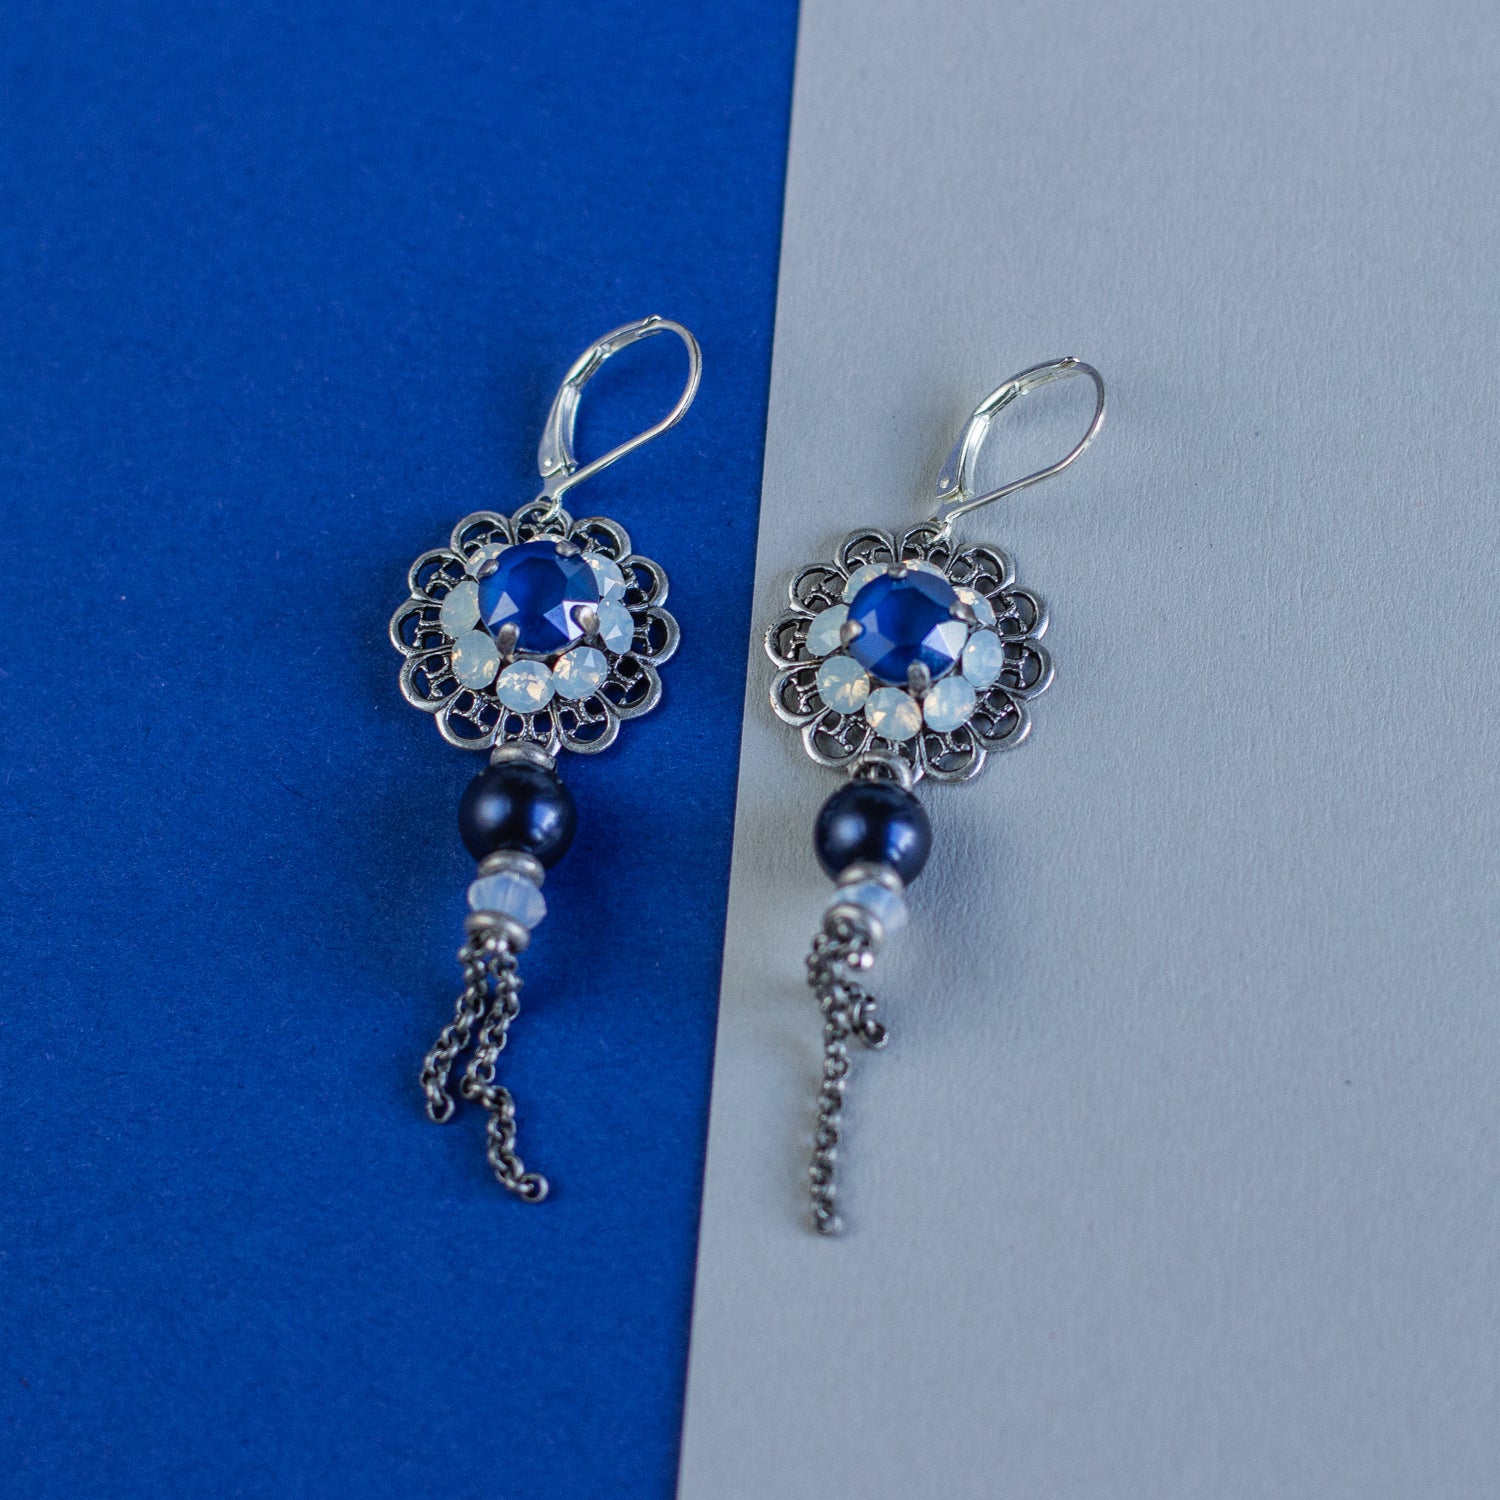 These earrings feature intricate filigree details in royal blue and silver, accented by shiny Swarovski crystals. They make a perfect gift for any occasion.